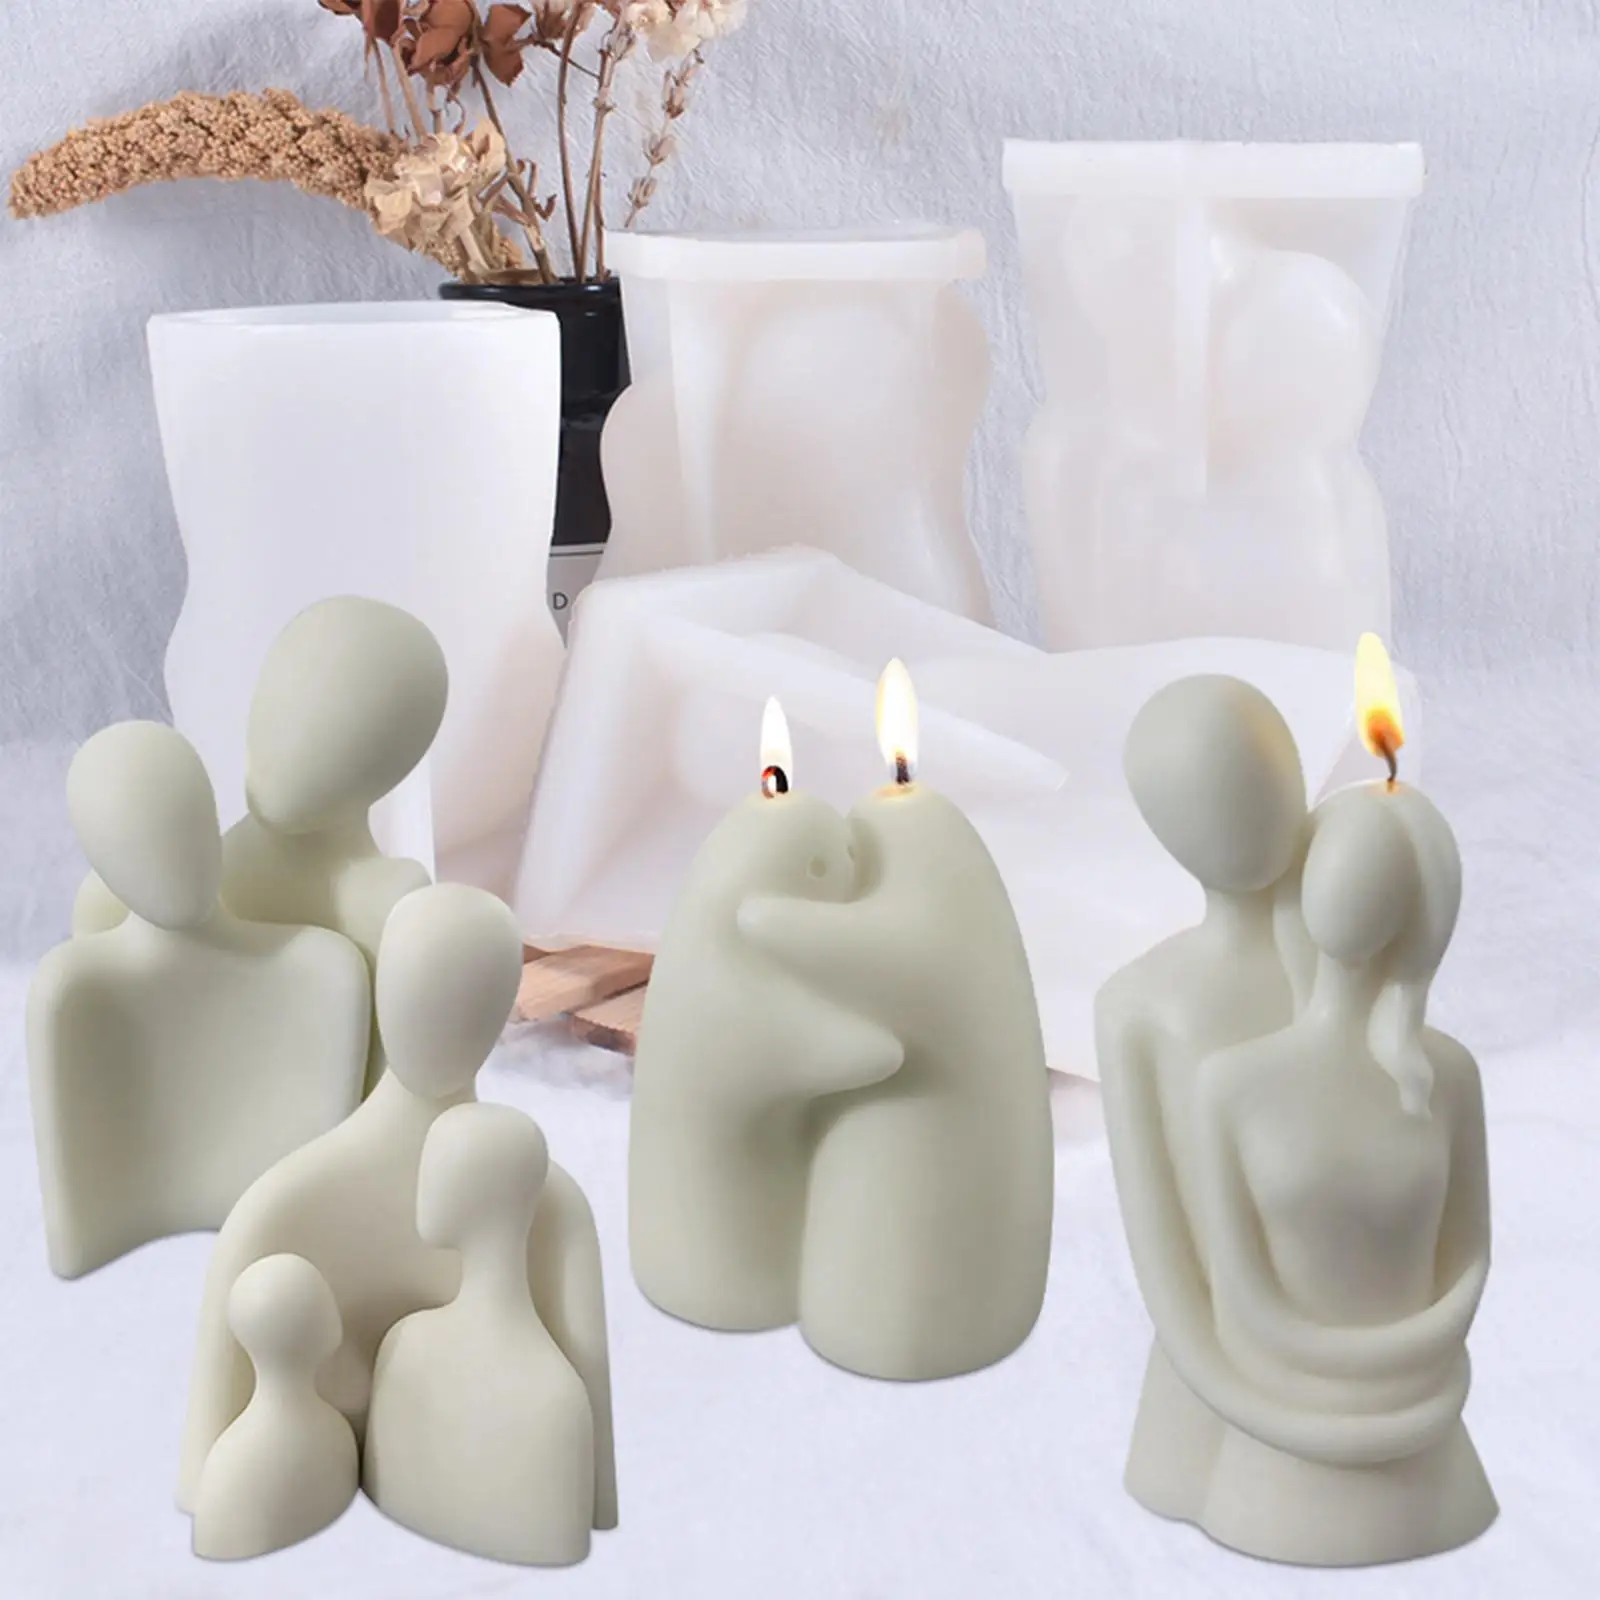 3D Male Female Body Candle Mold Home Decor Soap Wax DIY Silicone Supplie